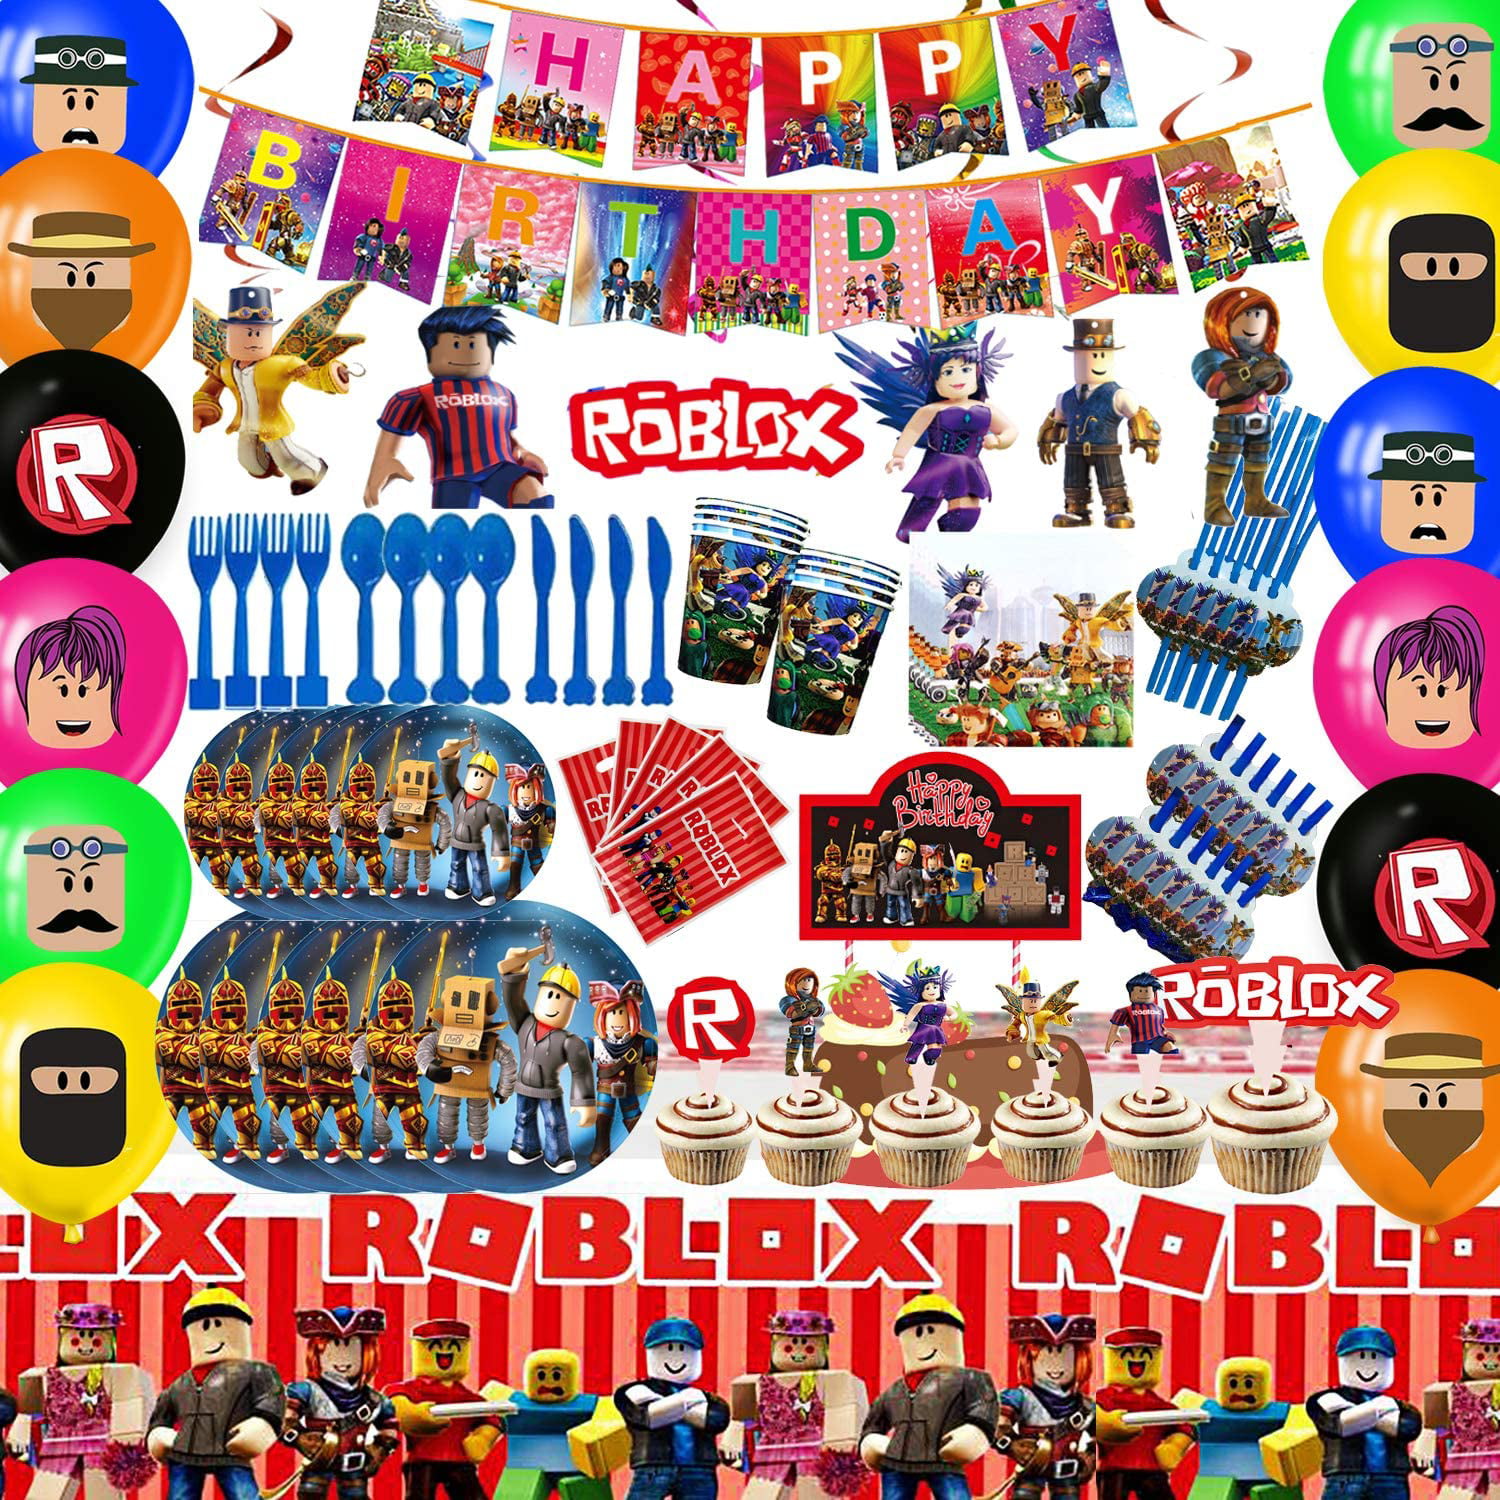 163pcs Roblox Birthday Party Supplies Robot Blocks Party Decorations Flatware Spoons Fork Knife Plates Cups Table Covers Banner Napkins Balloon And More Walmart Com Walmart Com